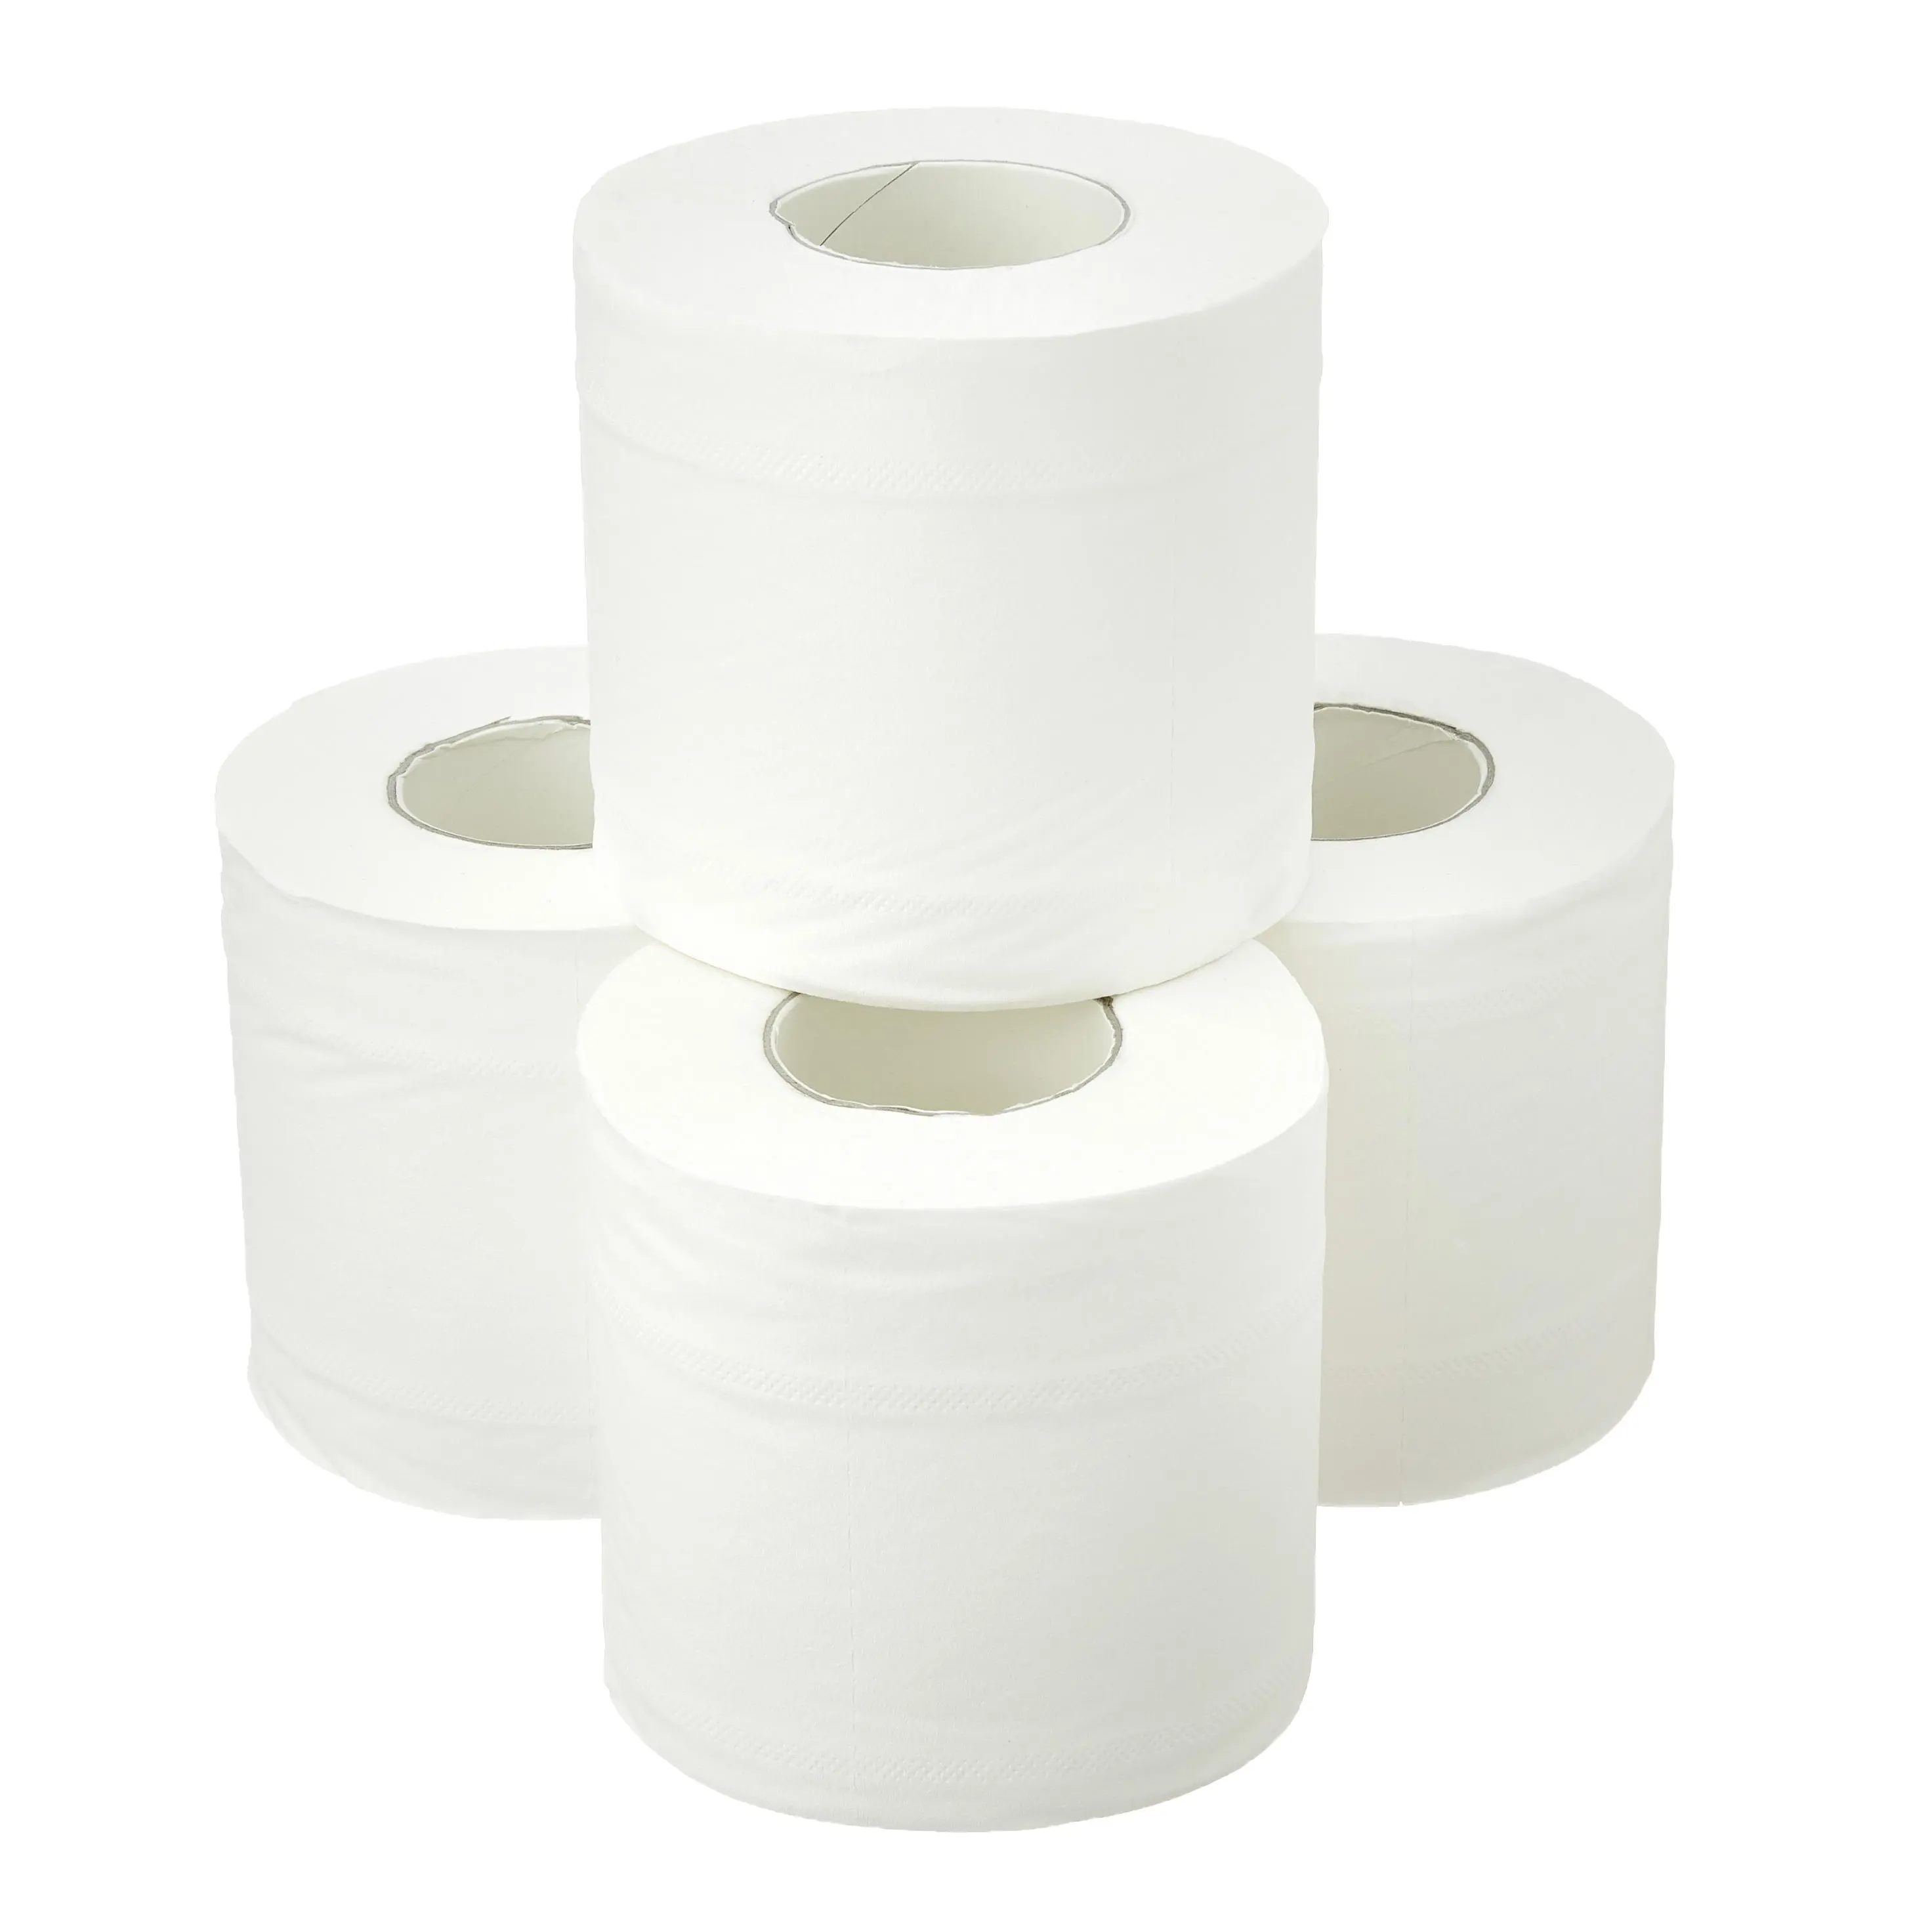 High Quality Individually Wrapped 2 / 3 Layers Disposable Bathroom Tissue Toilet Paper Available For Sale At Low Price